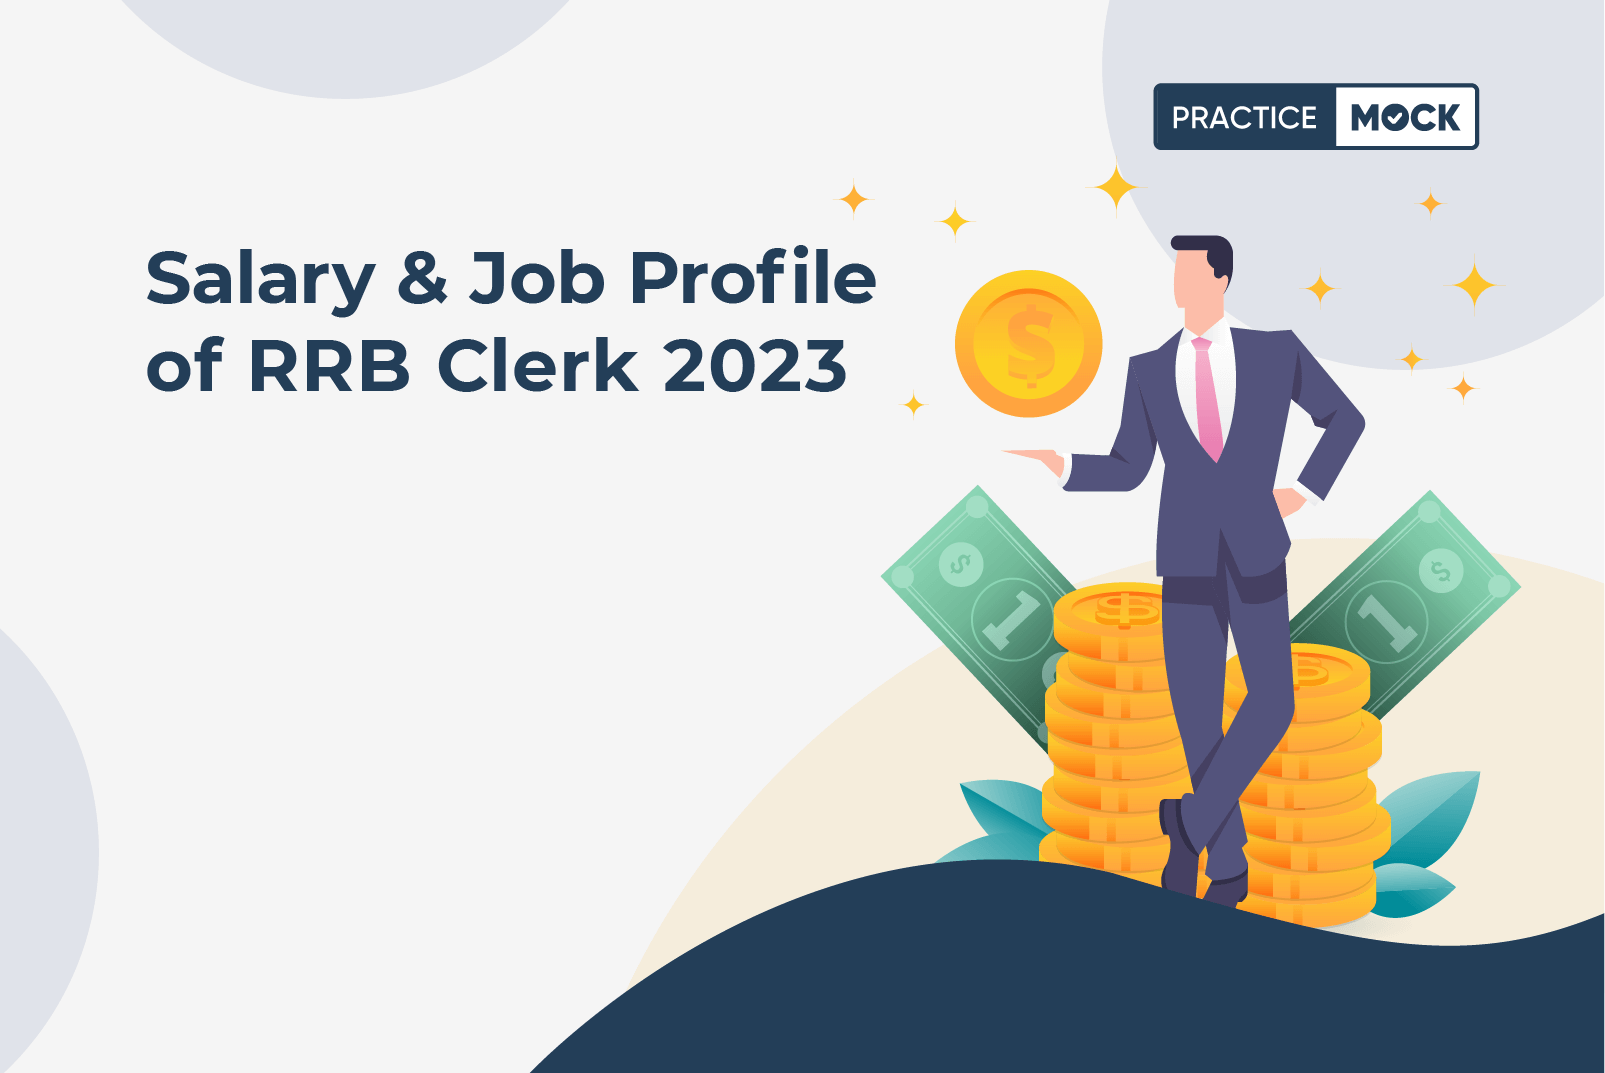 Salary & Job Profile of an RRB Clerk